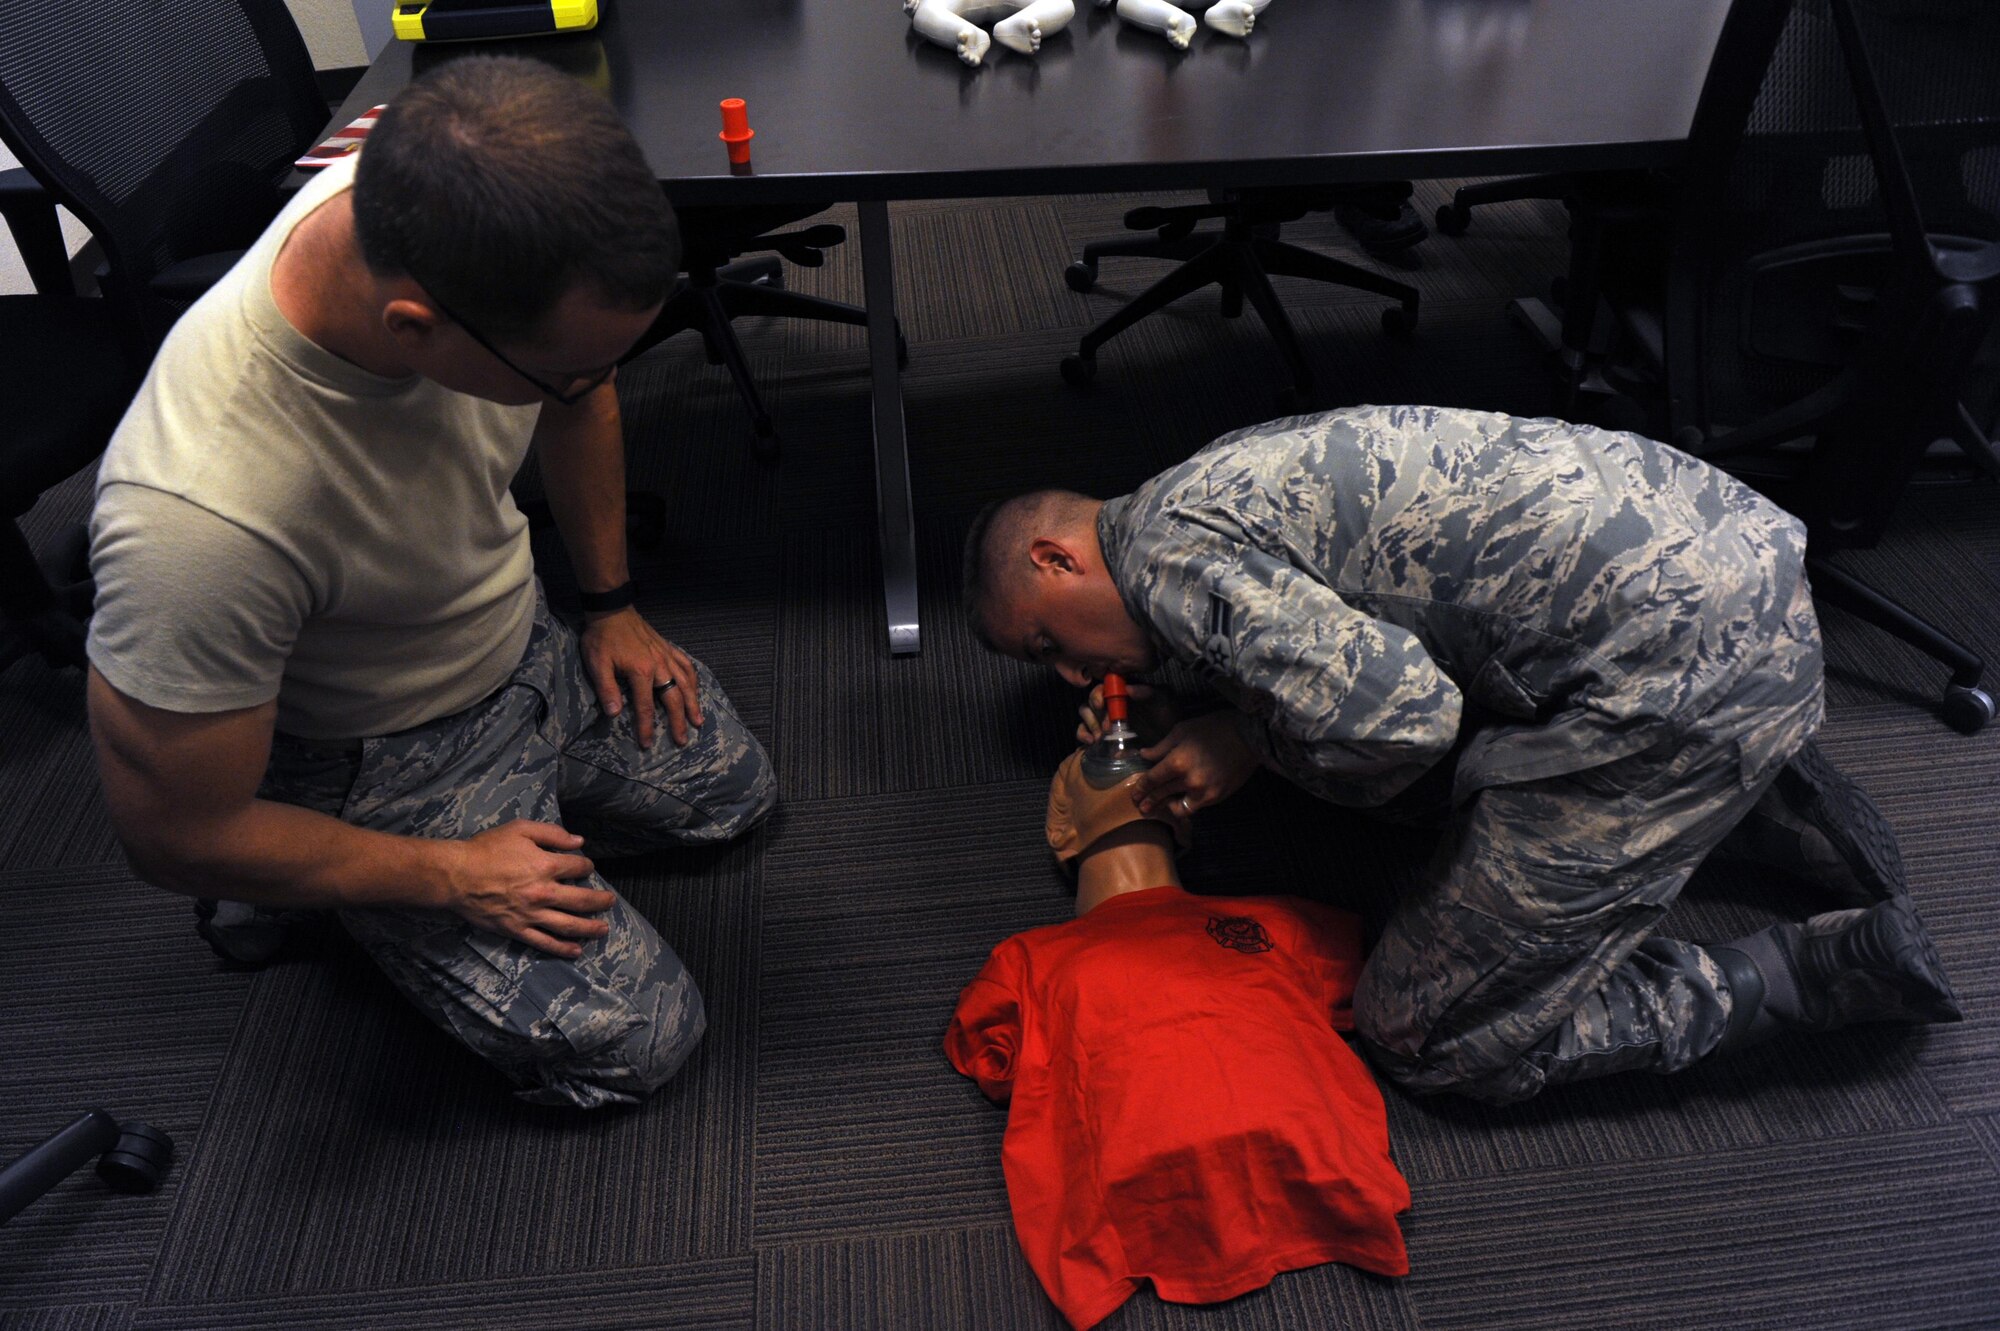 Senior Airman Timothy Wallace, 56th Medical Operation Squadron aerospace medical technician, observes Airman 1st Class Geoffrey Moreland, 56th Civil Engineer Squadron firefighter, performing cardiopulmonary resuscitation with a pocket CPR mask Sept. 20, 2016 at Luke Air force Base, Ariz. The pocket CPR mask contains a one way valve to prevent the spread of disease. (U.S. Air Force Photos by Airman 1st Class Pedro Mota)